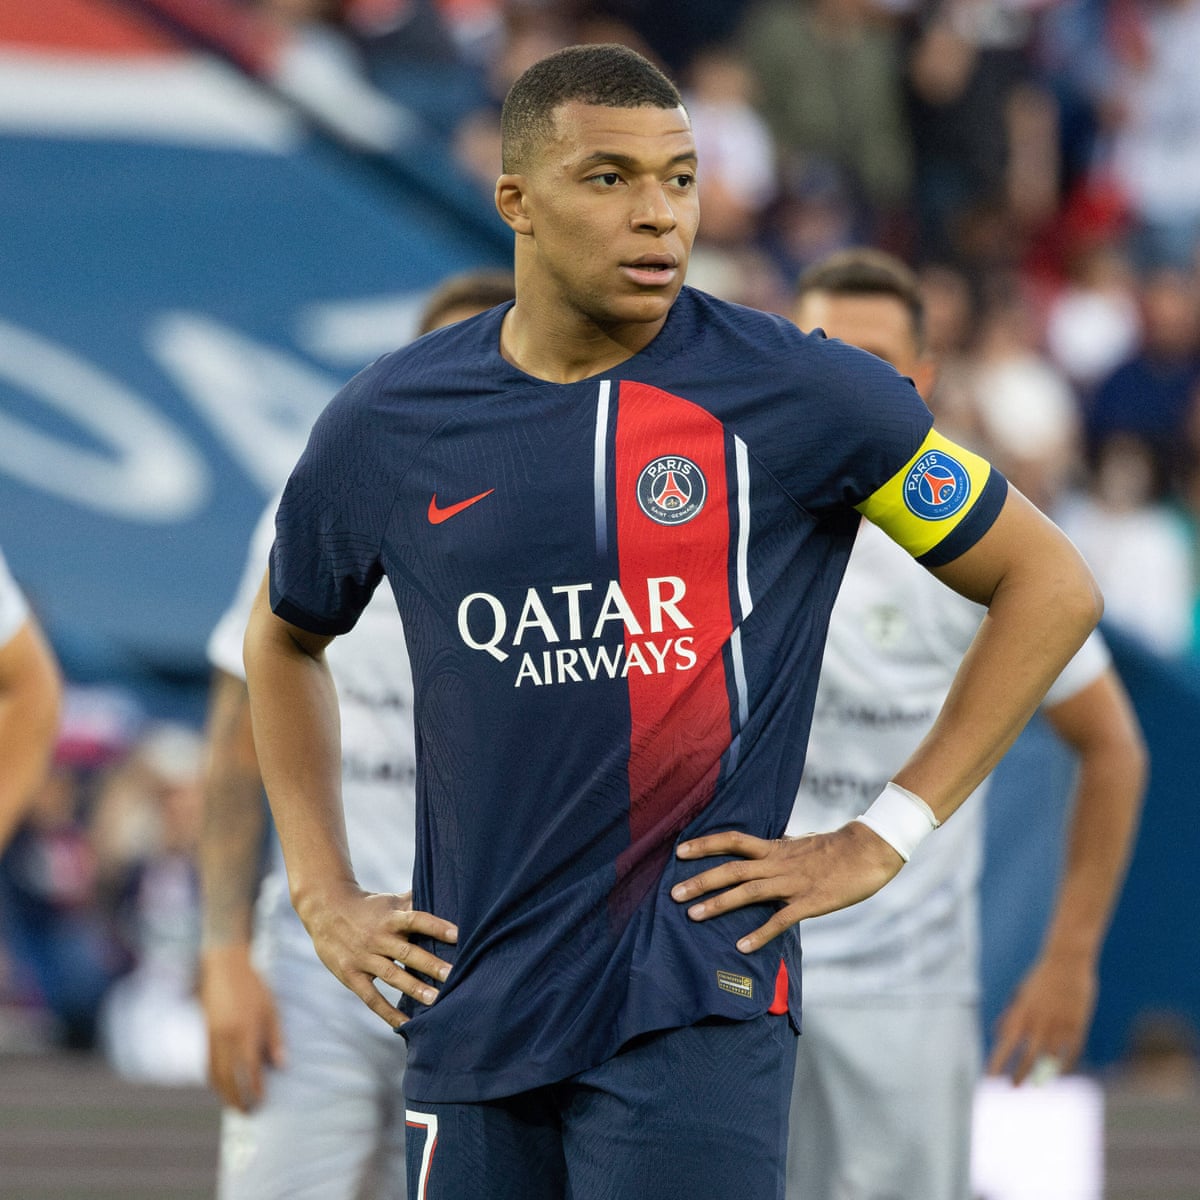 Kylian Mbappé's extraordinary gifts are being wasted at Paris Saint-Germain | Kylian Mbappé | The Guardian